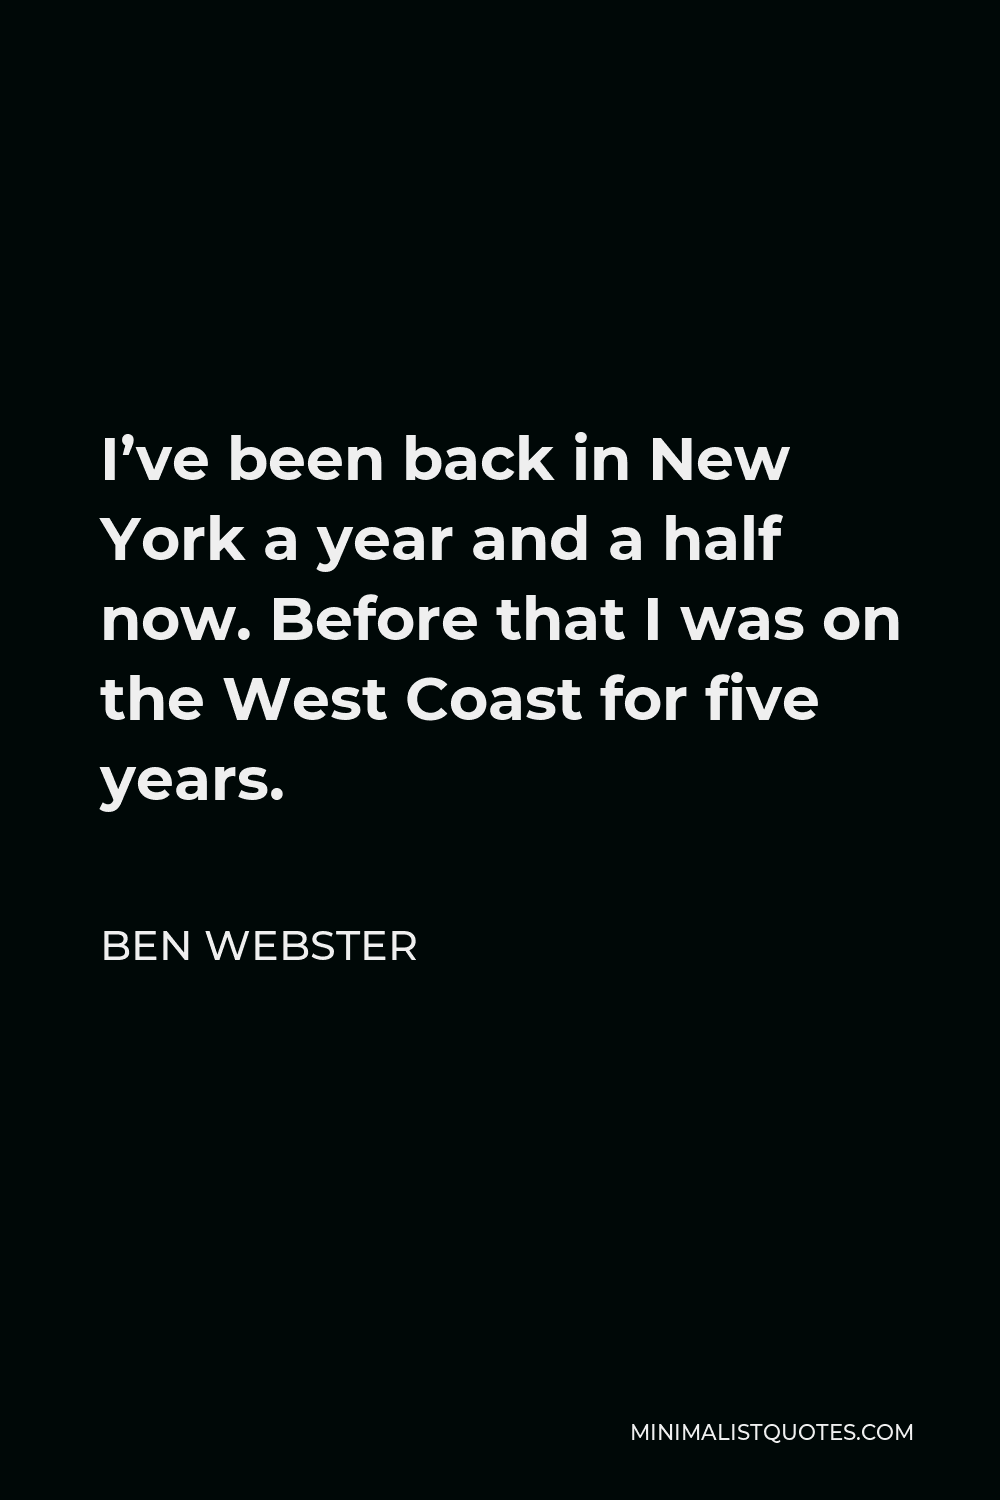 Ben Webster Quote - I’ve been back in New York a year and a half now. Before that I was on the West Coast for five years.